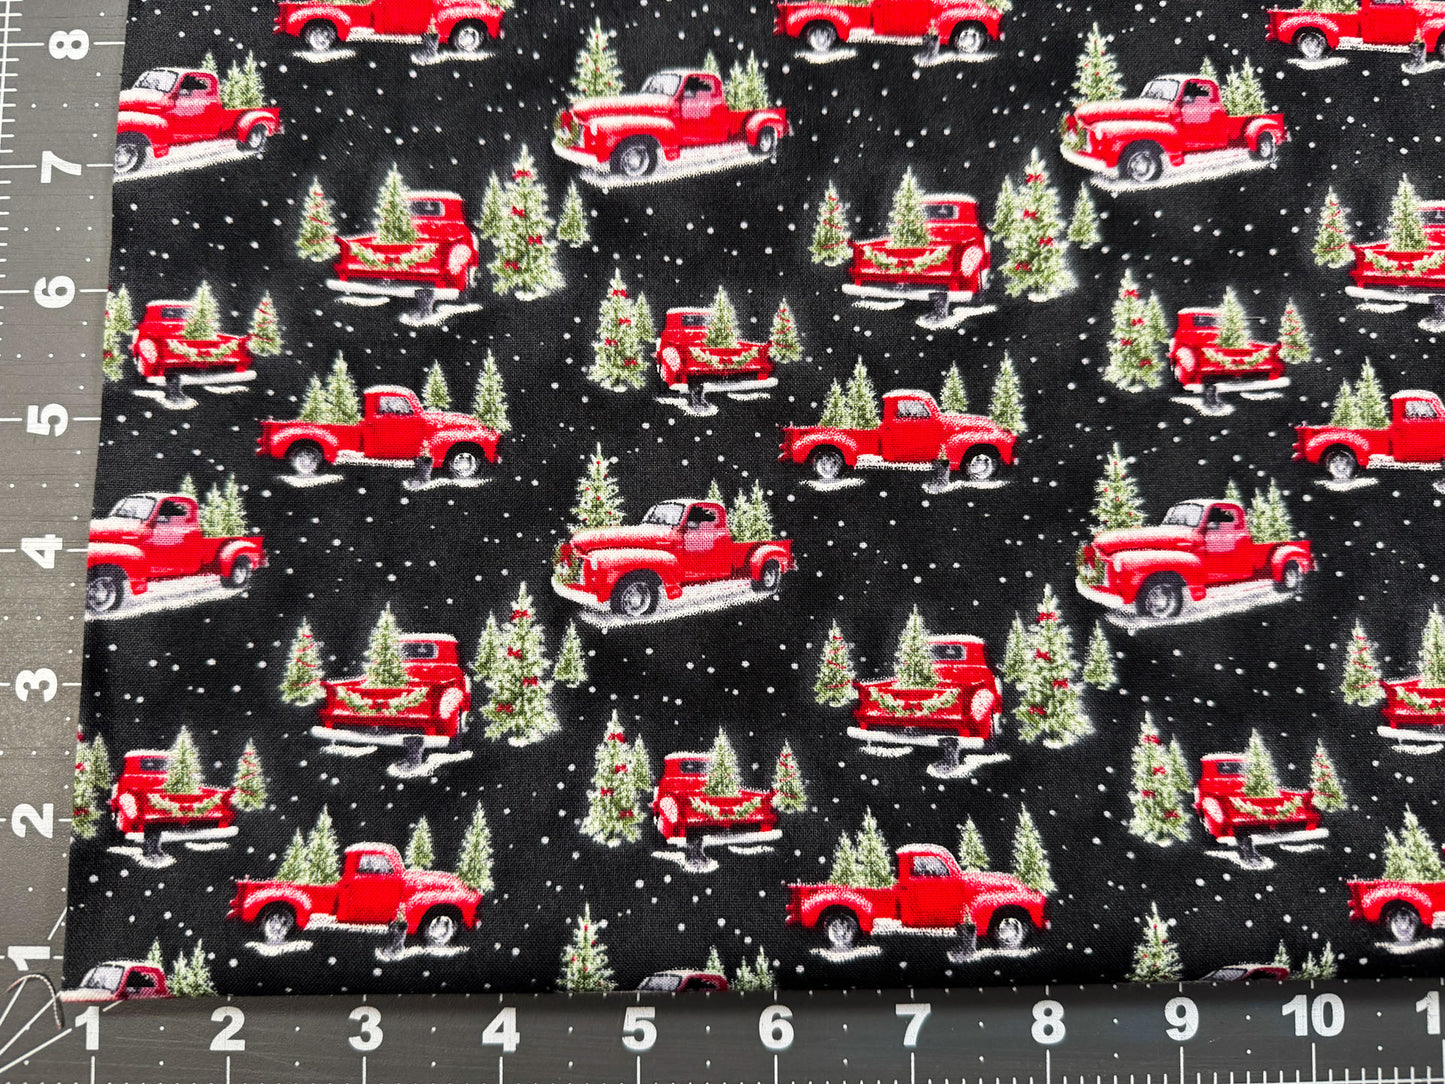 Red Truck Christmas fabric Christmas trees and vintage truck